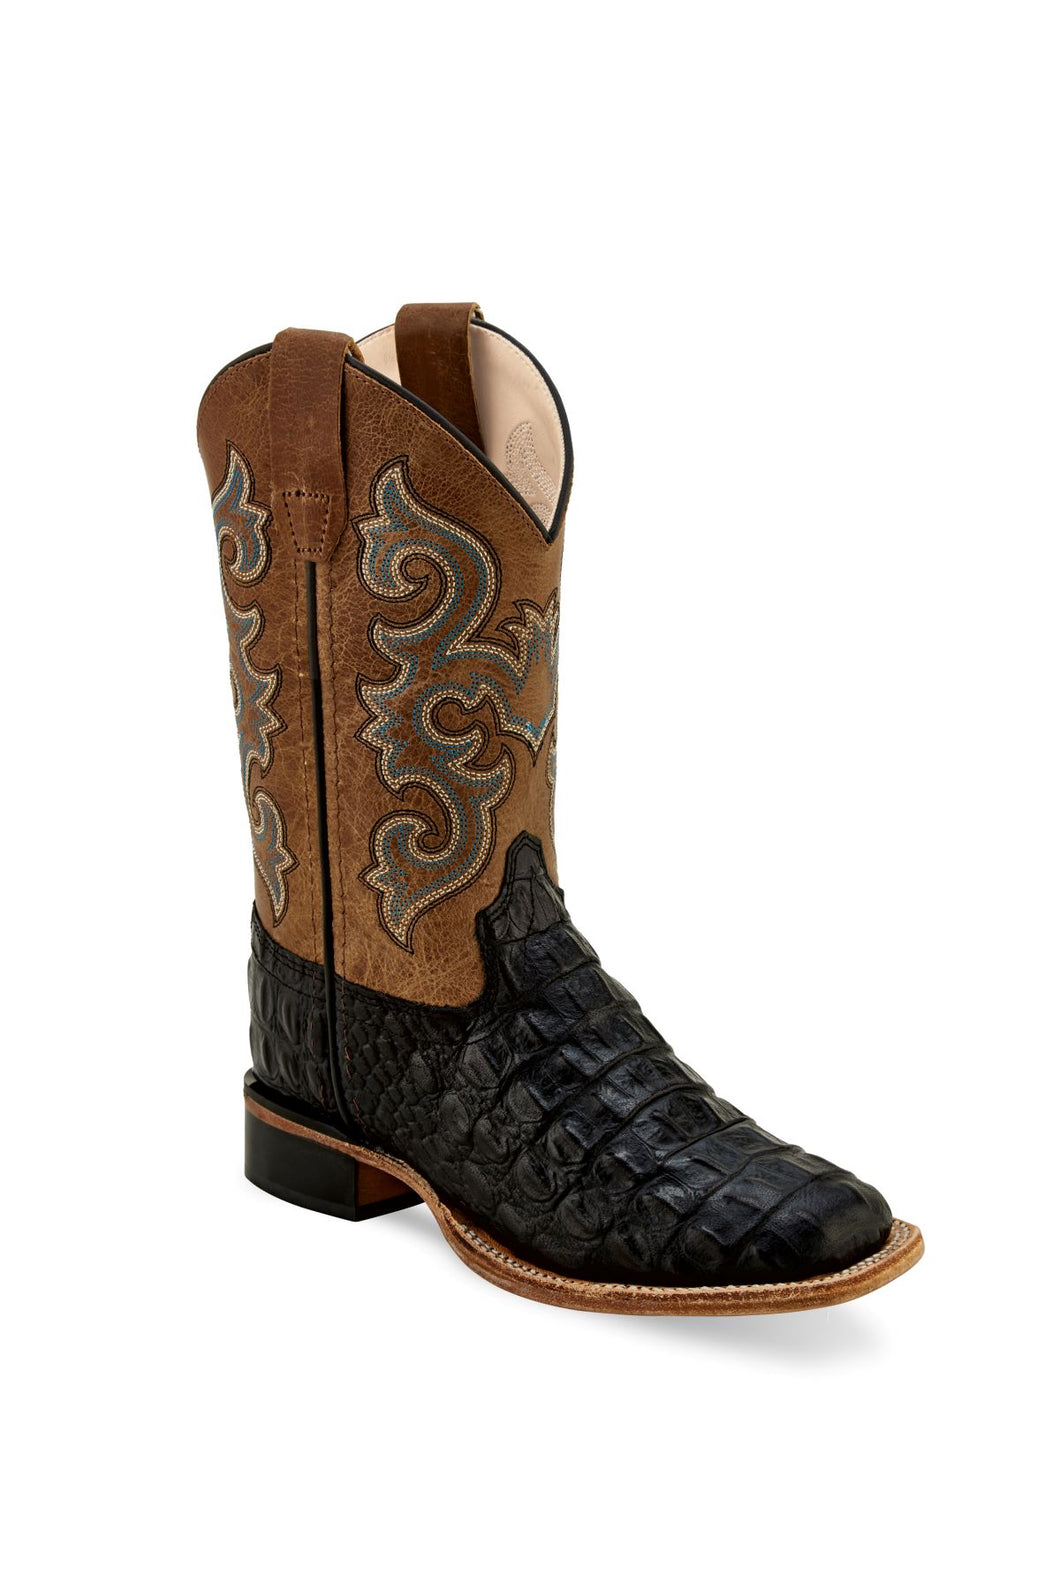 'Old West' Child's Western Caiman Square Toe - Black / Tan